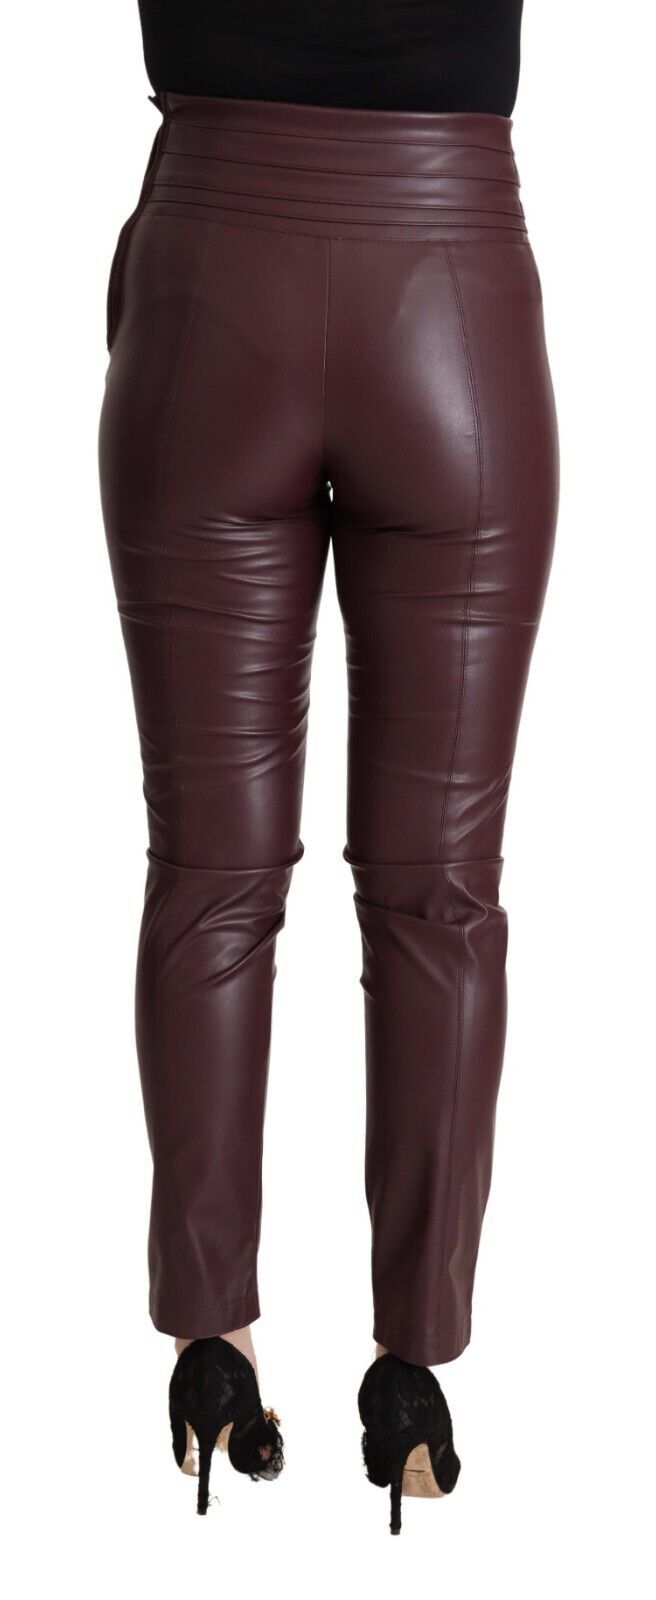 High Waist Leather Skinny Pants in Chic Brown